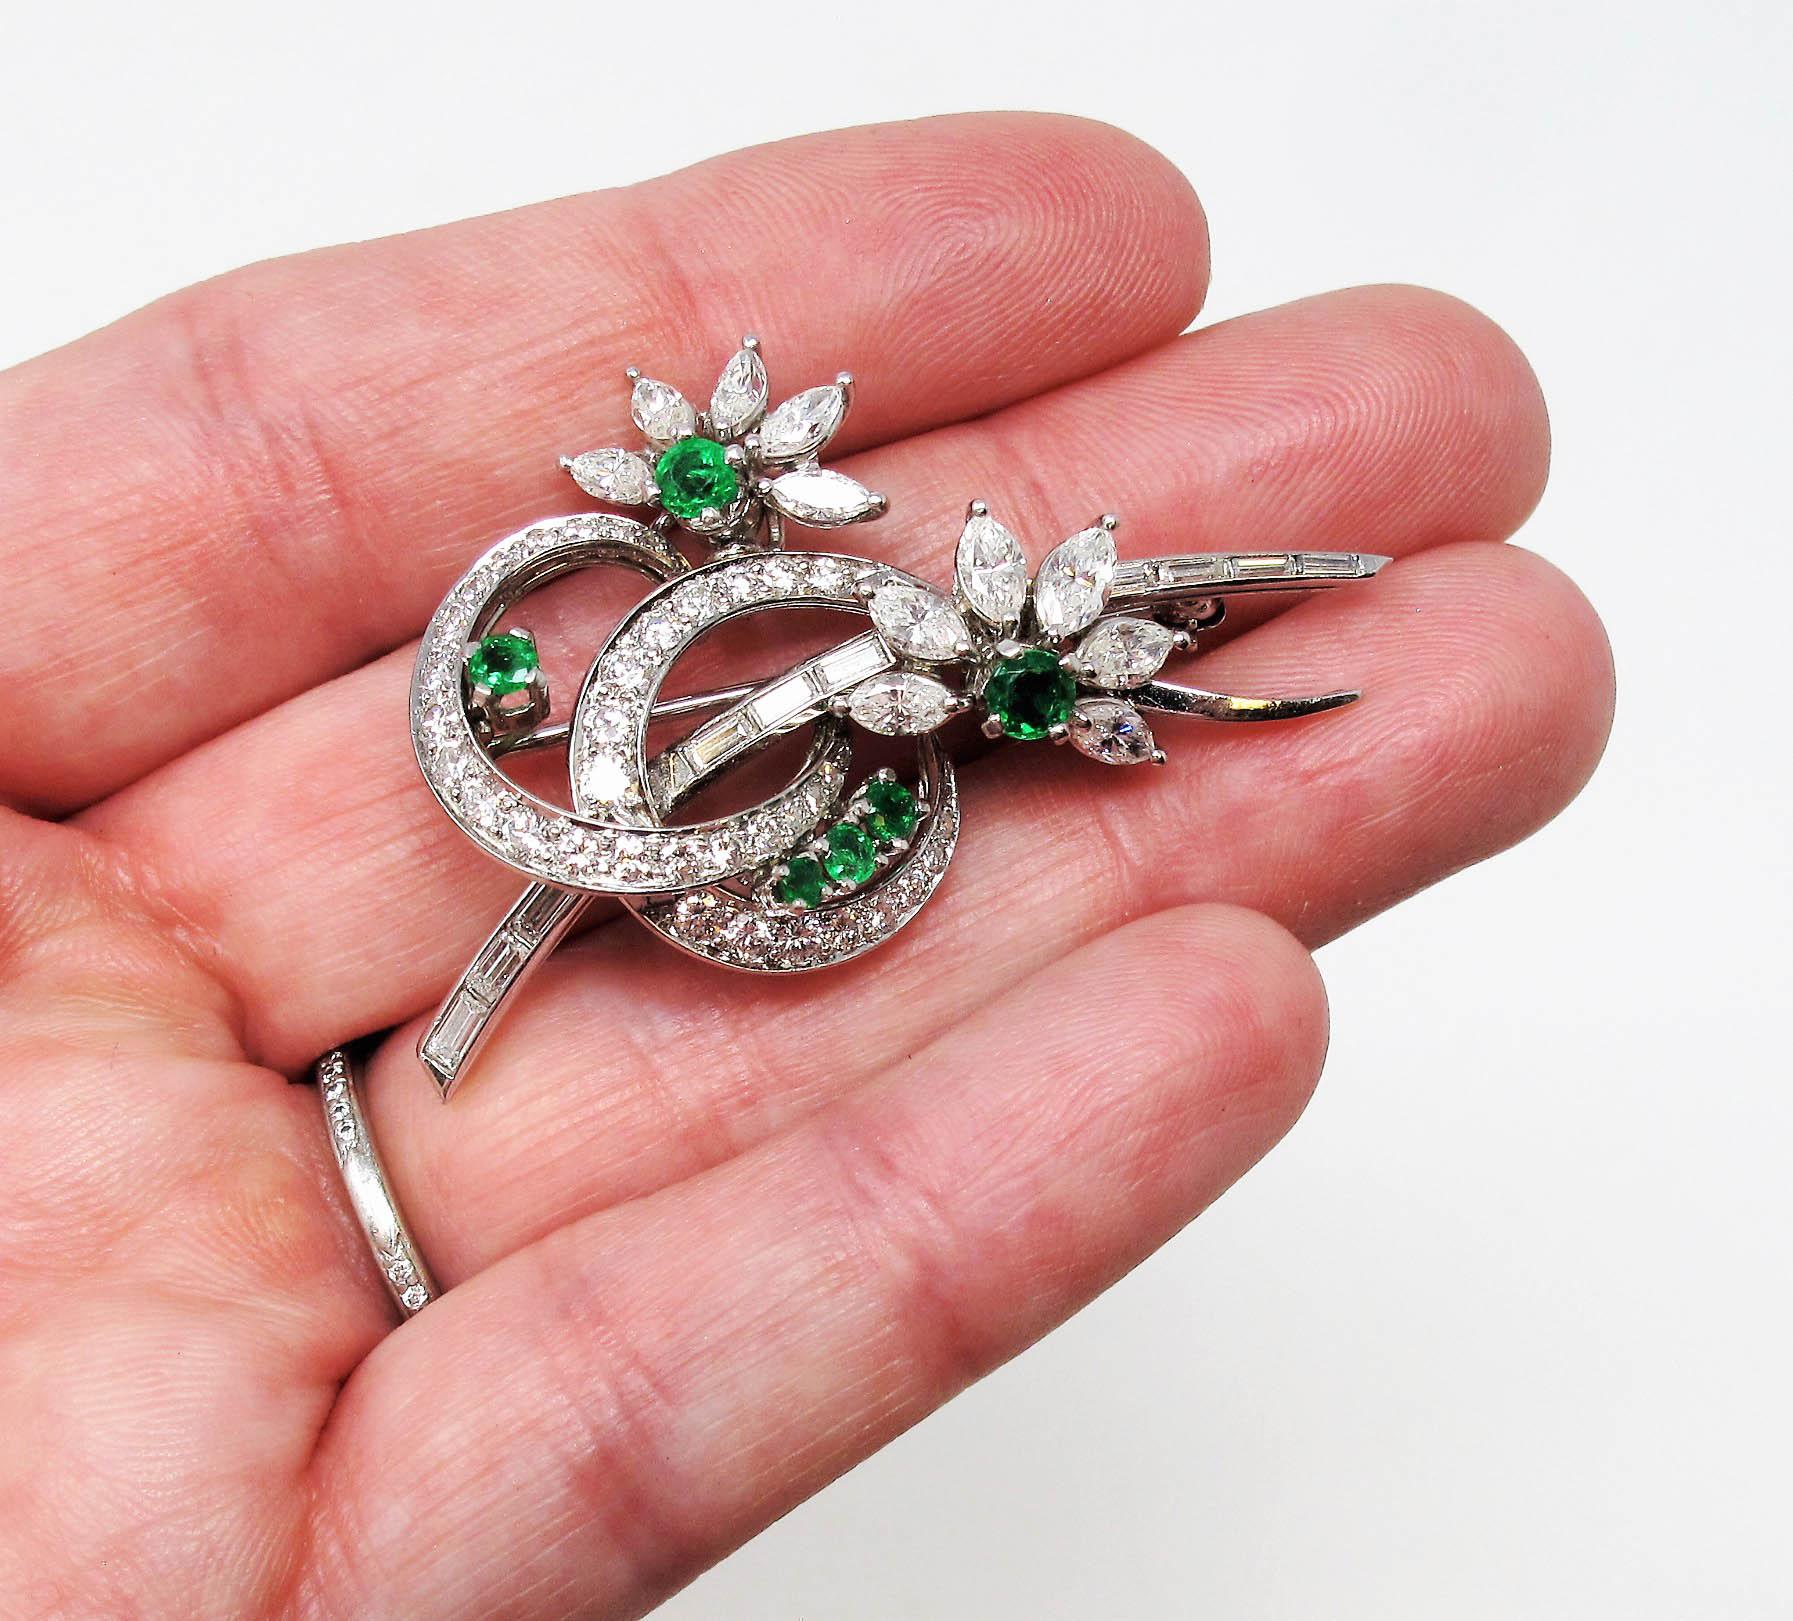 Simply stunning diamond and emerald brooch. We absolutely love the timeless style of this versatile brooch. Shimmering with bright green emeralds and over 50 icy white diamonds, this elegant brooch will add just the right amount of sparkle and style